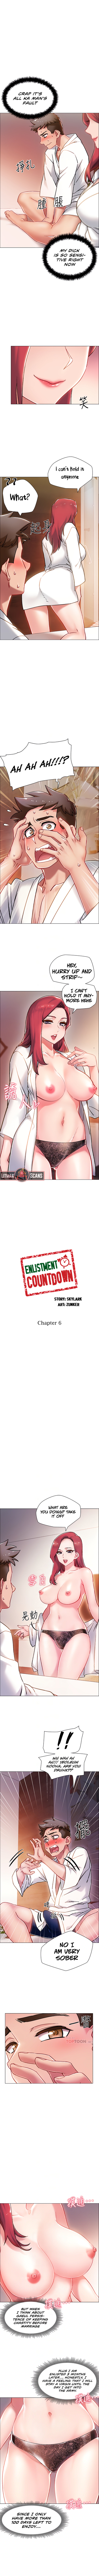 Enlistment Countdown - Chapter 6 Page 2